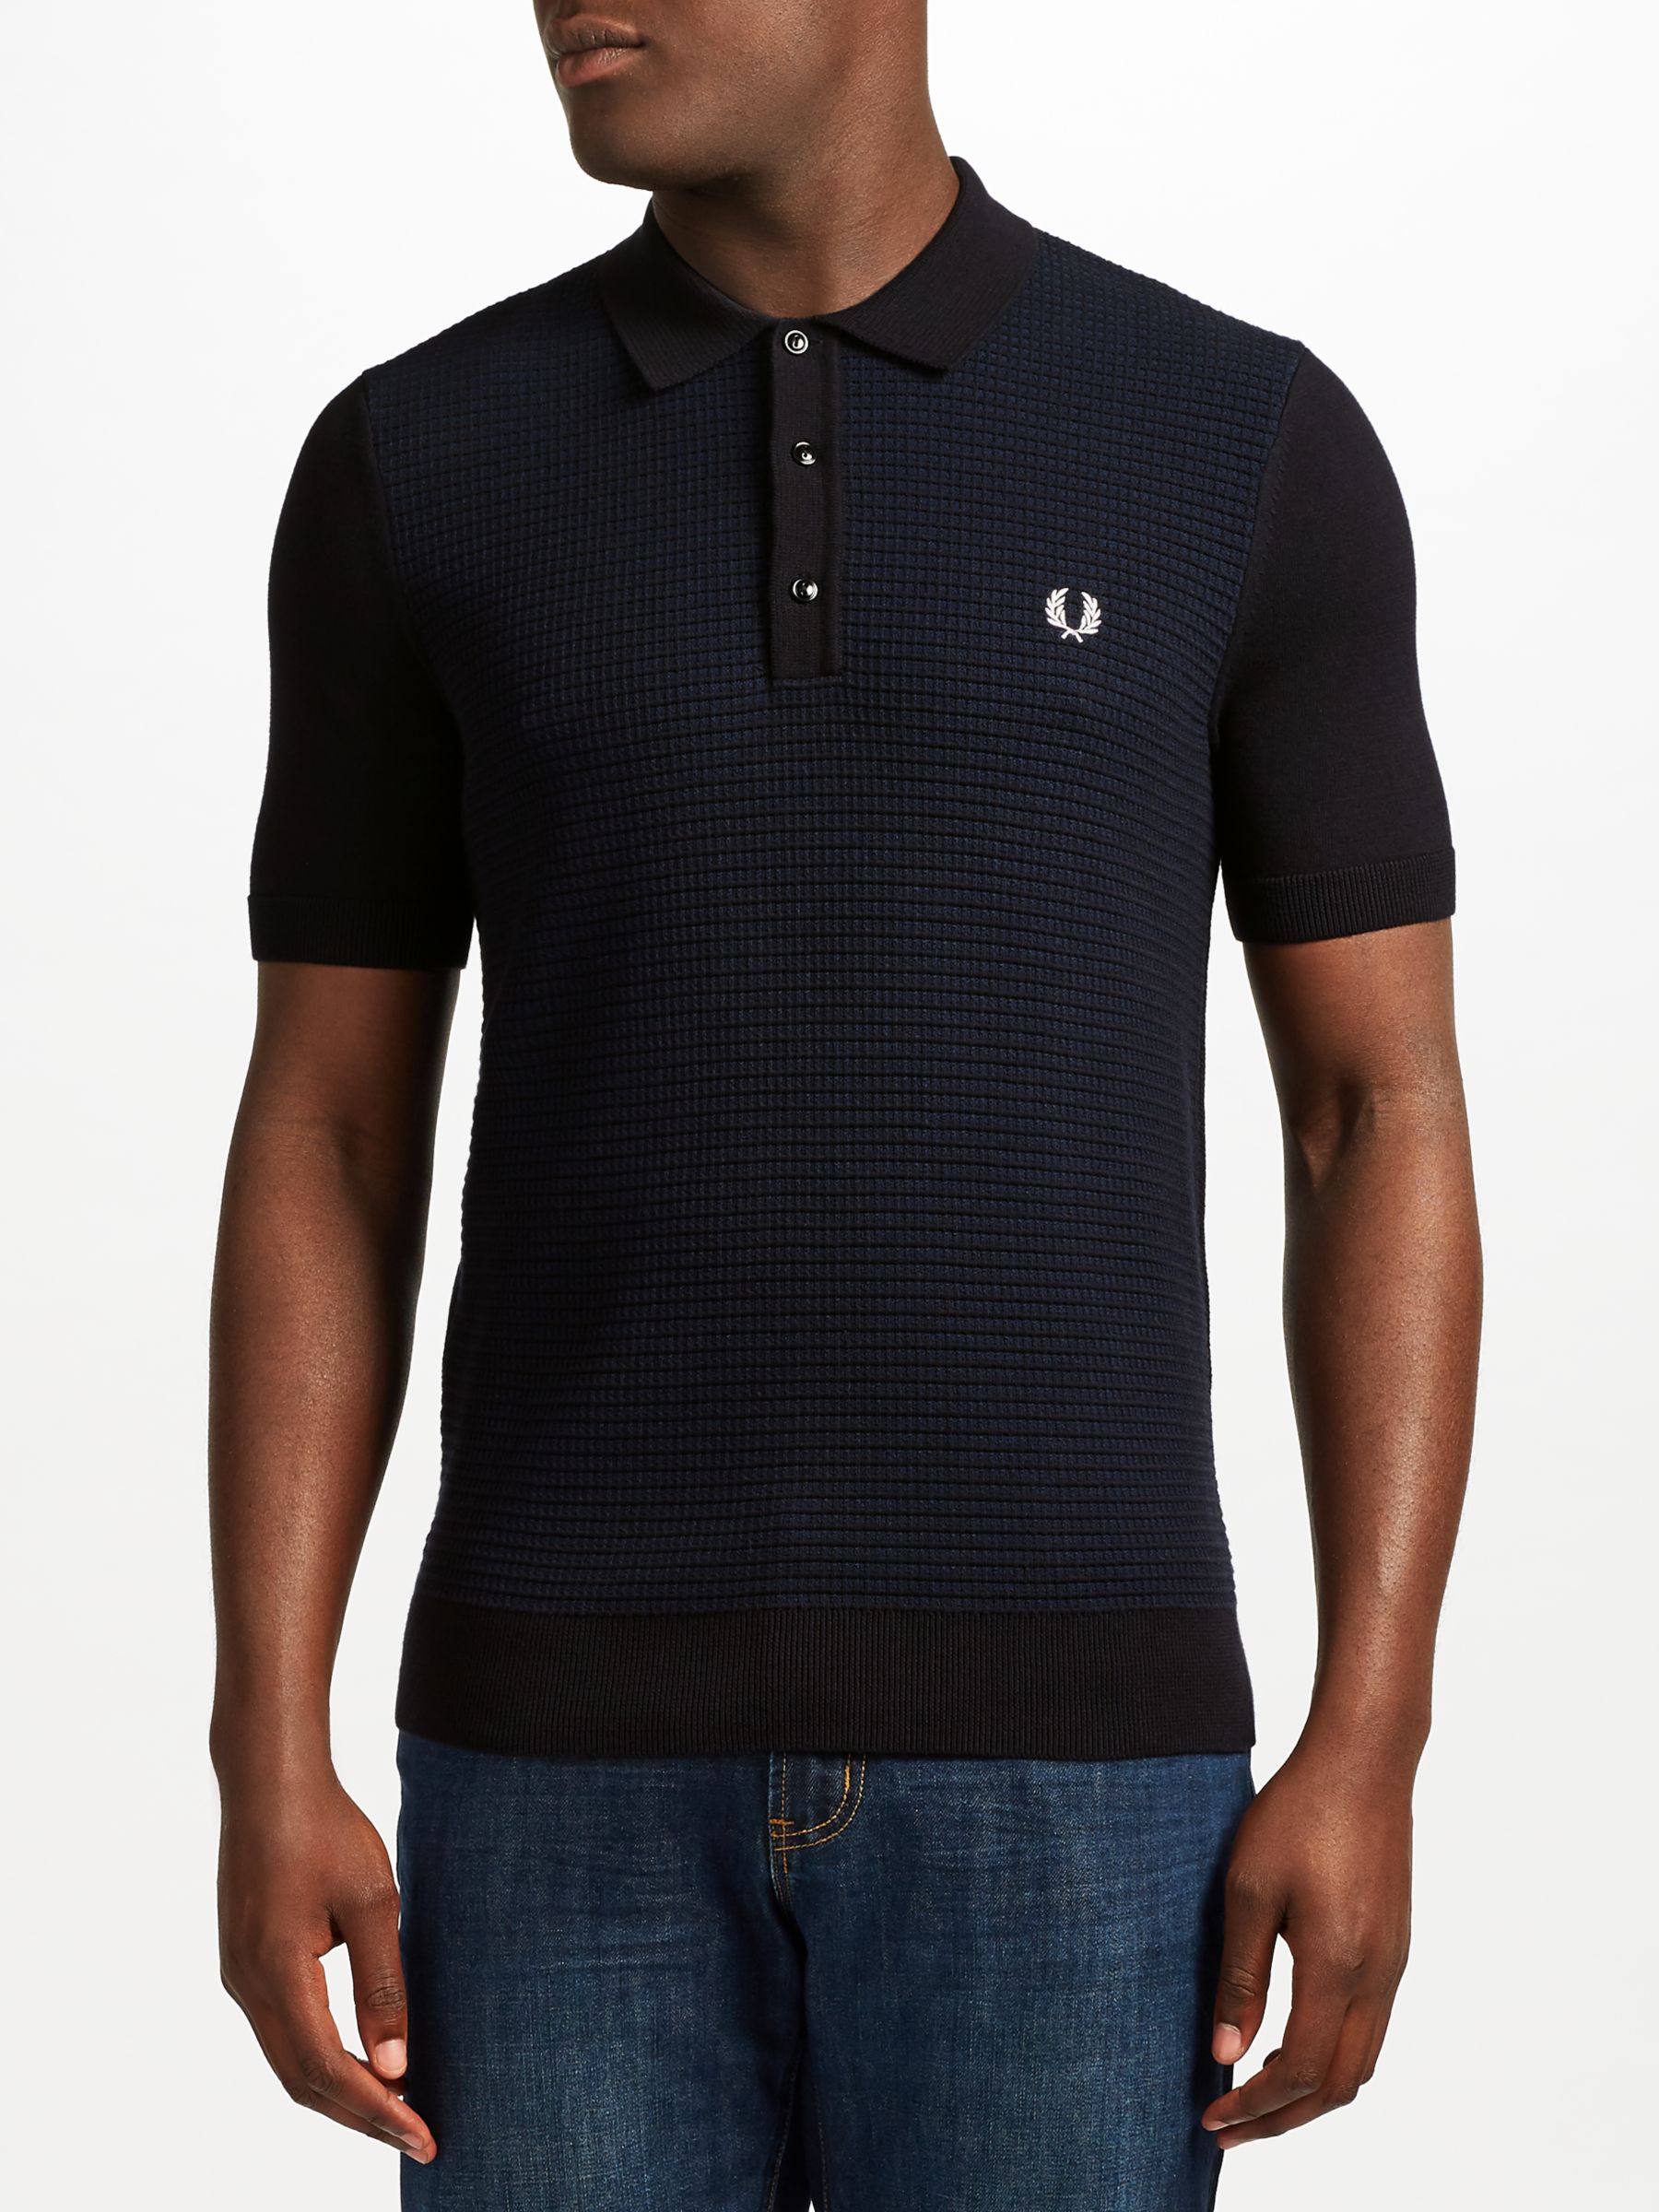 Fred Textured Knit Polo Shirt, Black/Navy